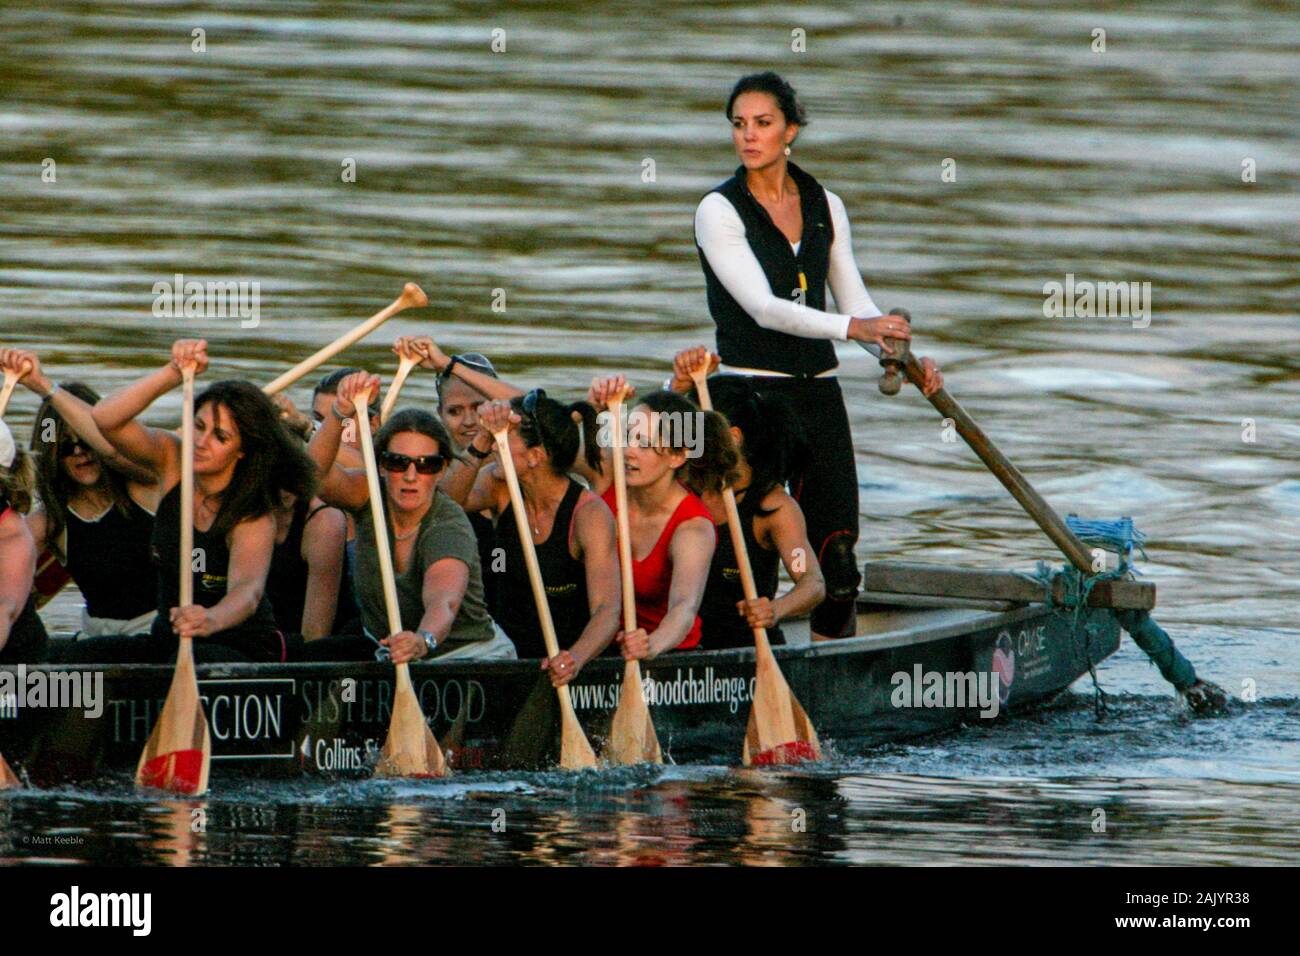 Kate Middleton, before she was The Duchess of Cambridge, training on board a dragon boat, in London, UK 2007. Kate made her now infamous appearance in the boat in 2007 following a brief split from William as the Sisterhood prepared for a cross-Channel race in the traditional Chinese vessel against all-boys crew the Brotherhood Stock Photo